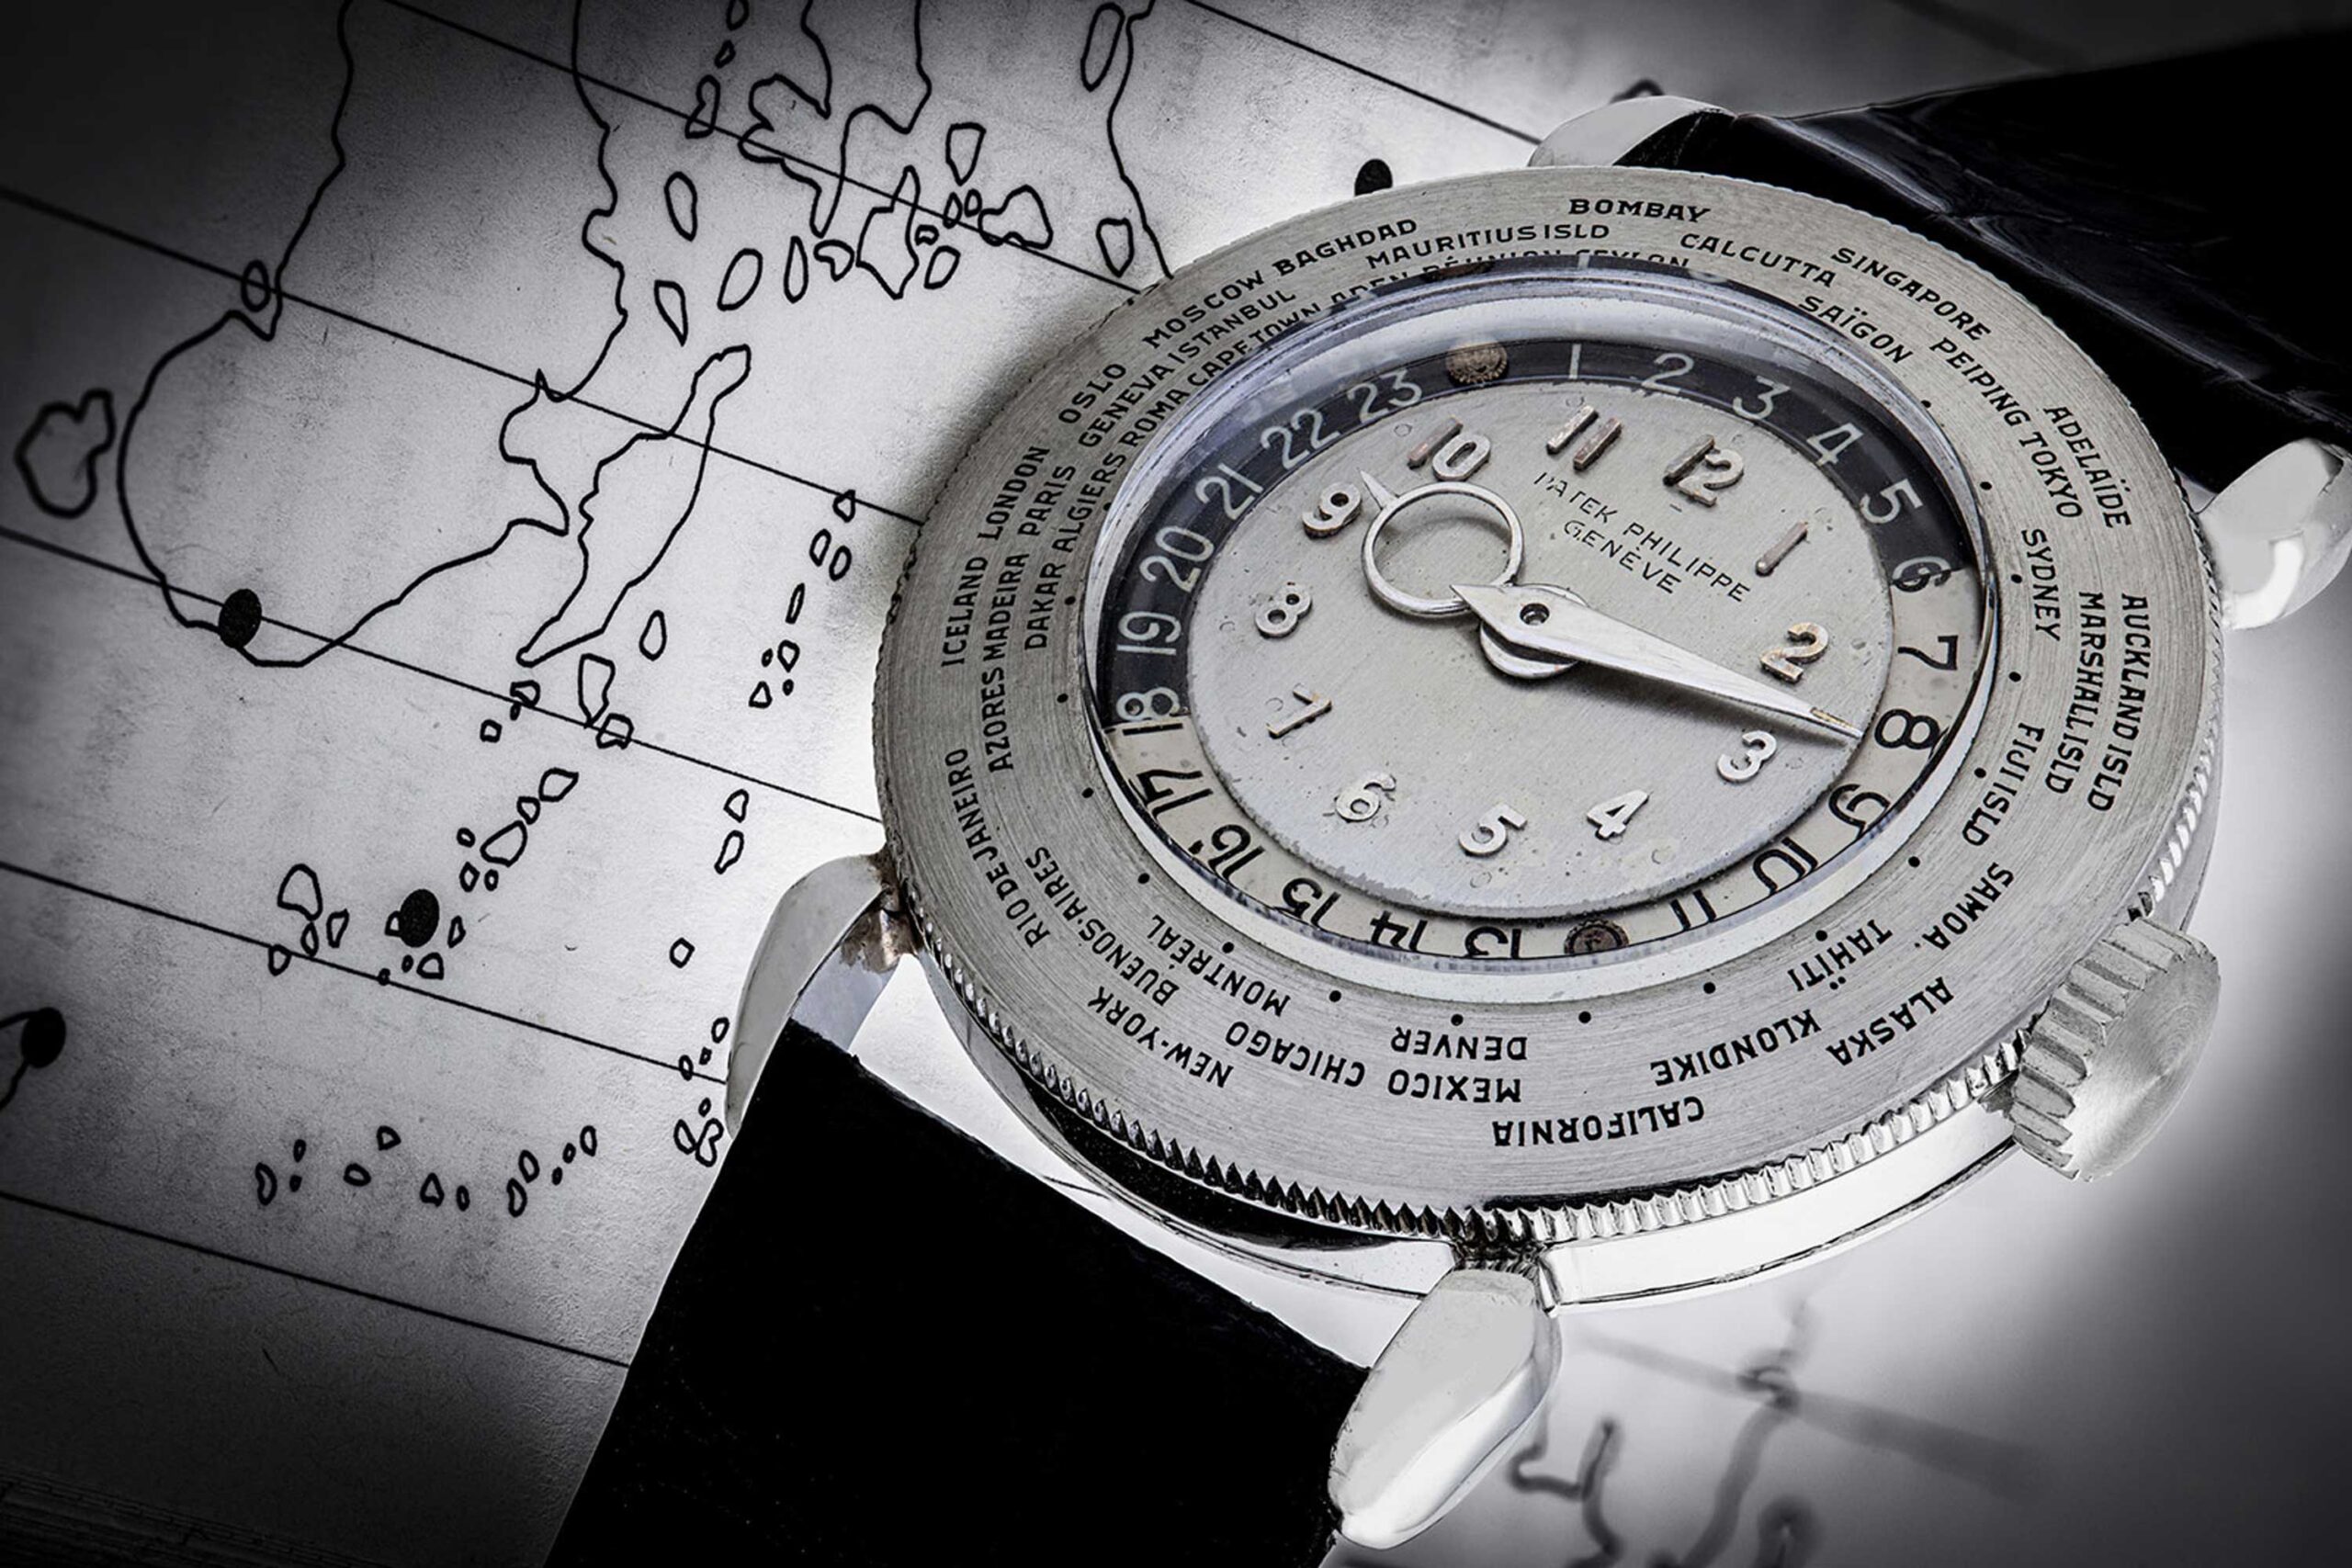 The platinum ref. 1415 HU has its case, dial, hands and even the Arabic hour markers all made out of platinum (Image: Christie’s)